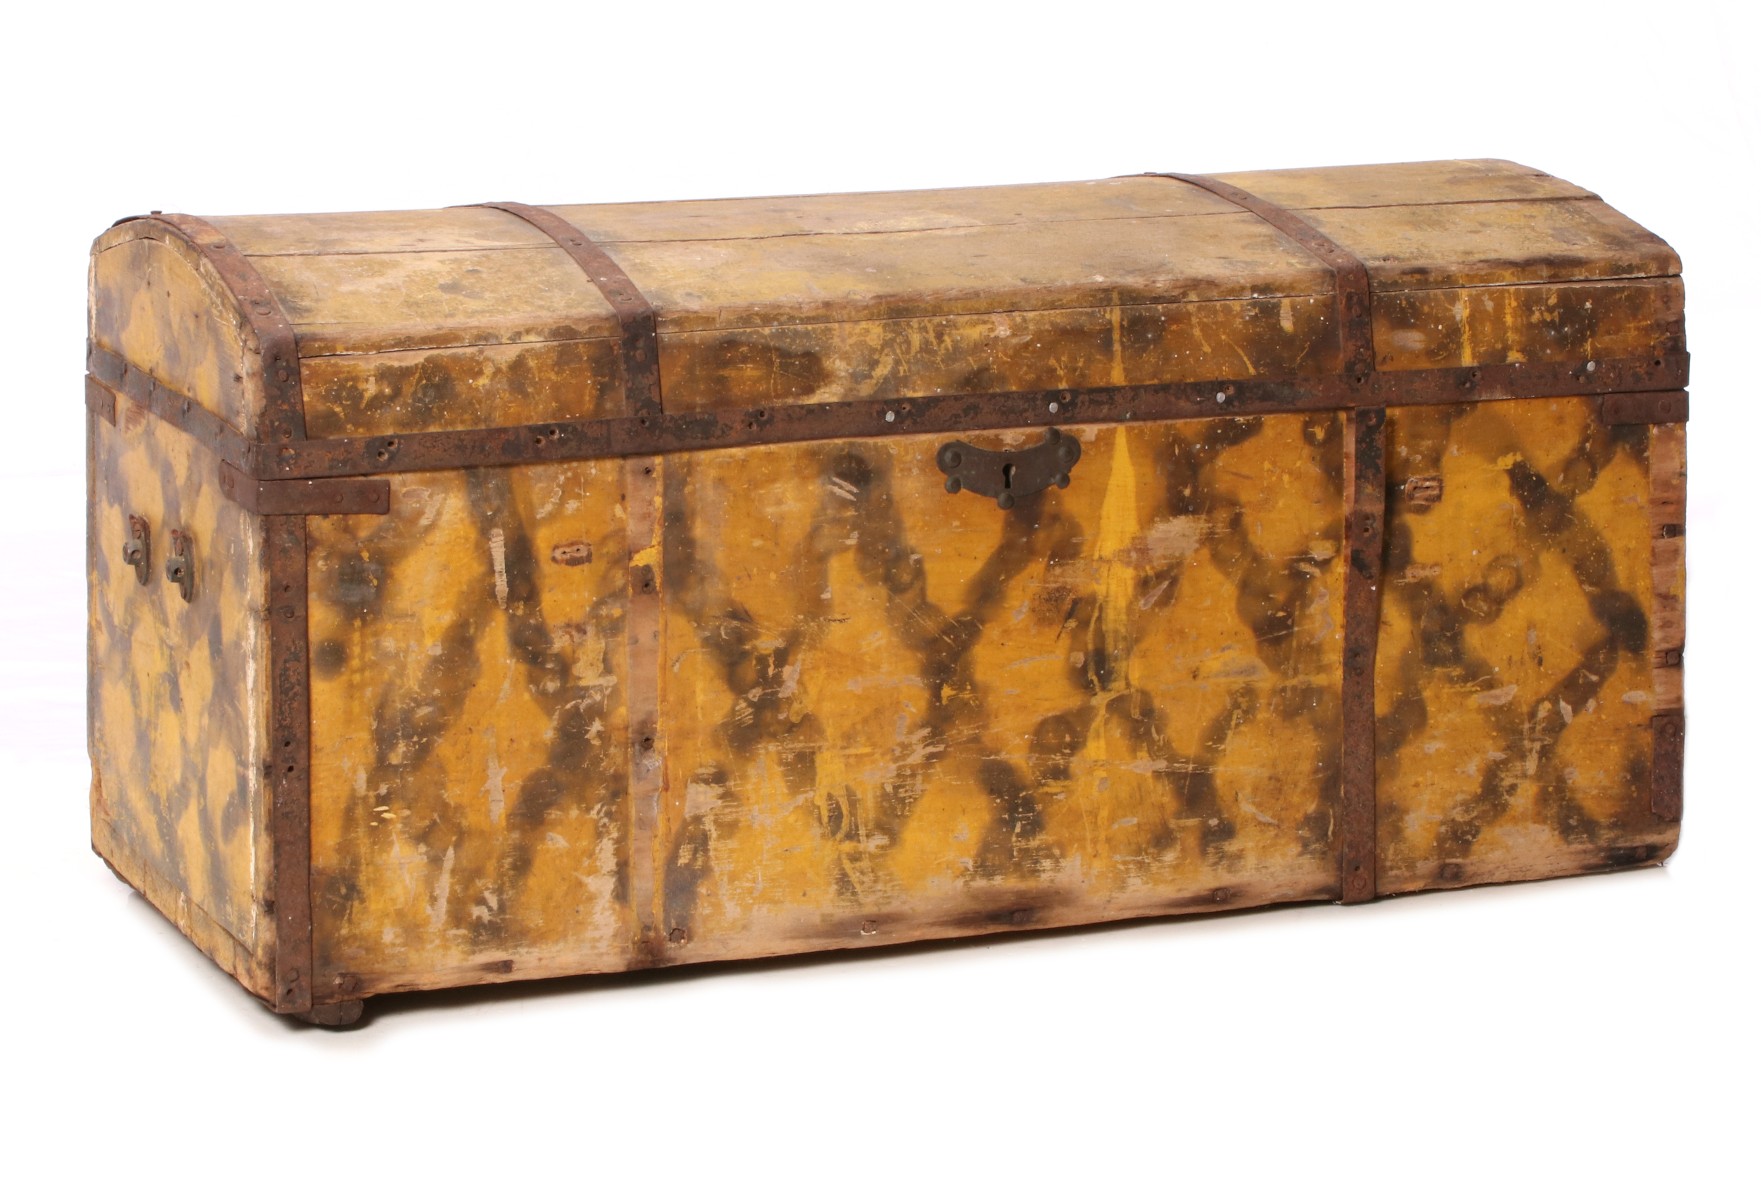 A 19TH C SEAMAN'S CHEST WITH SMOKE DECORATION ON YELLOW